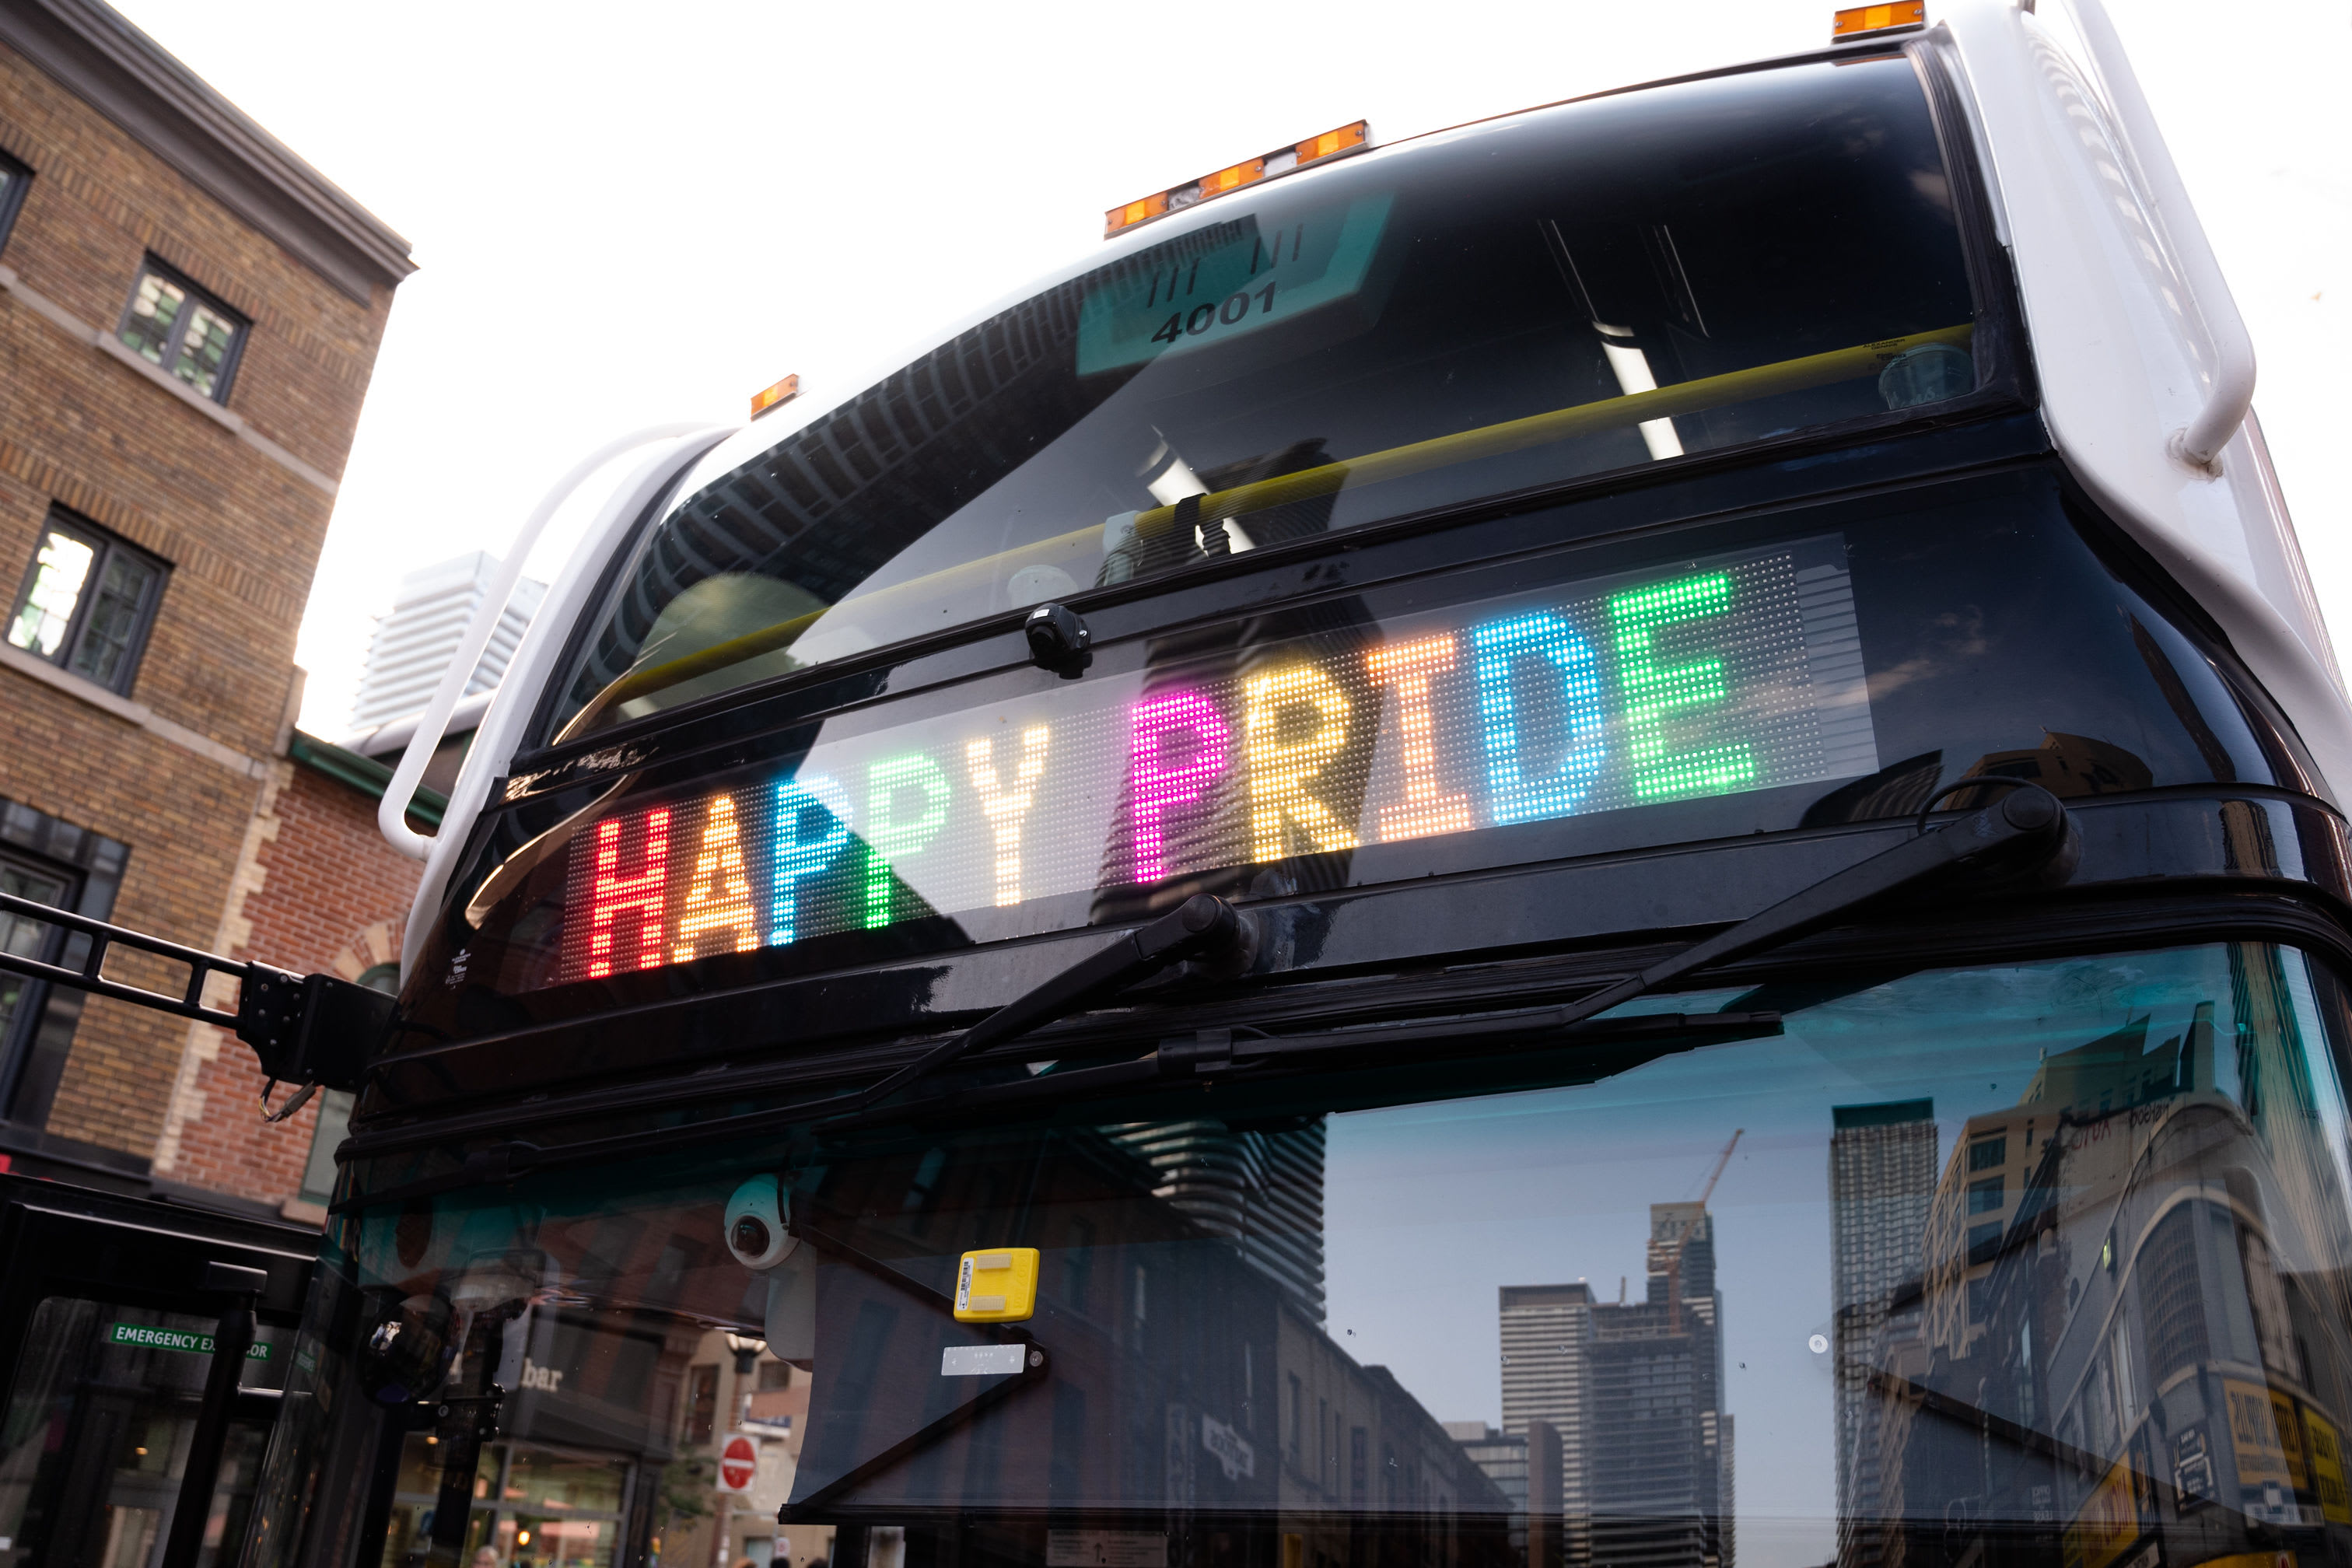 Ride with Pride on GO Transit!